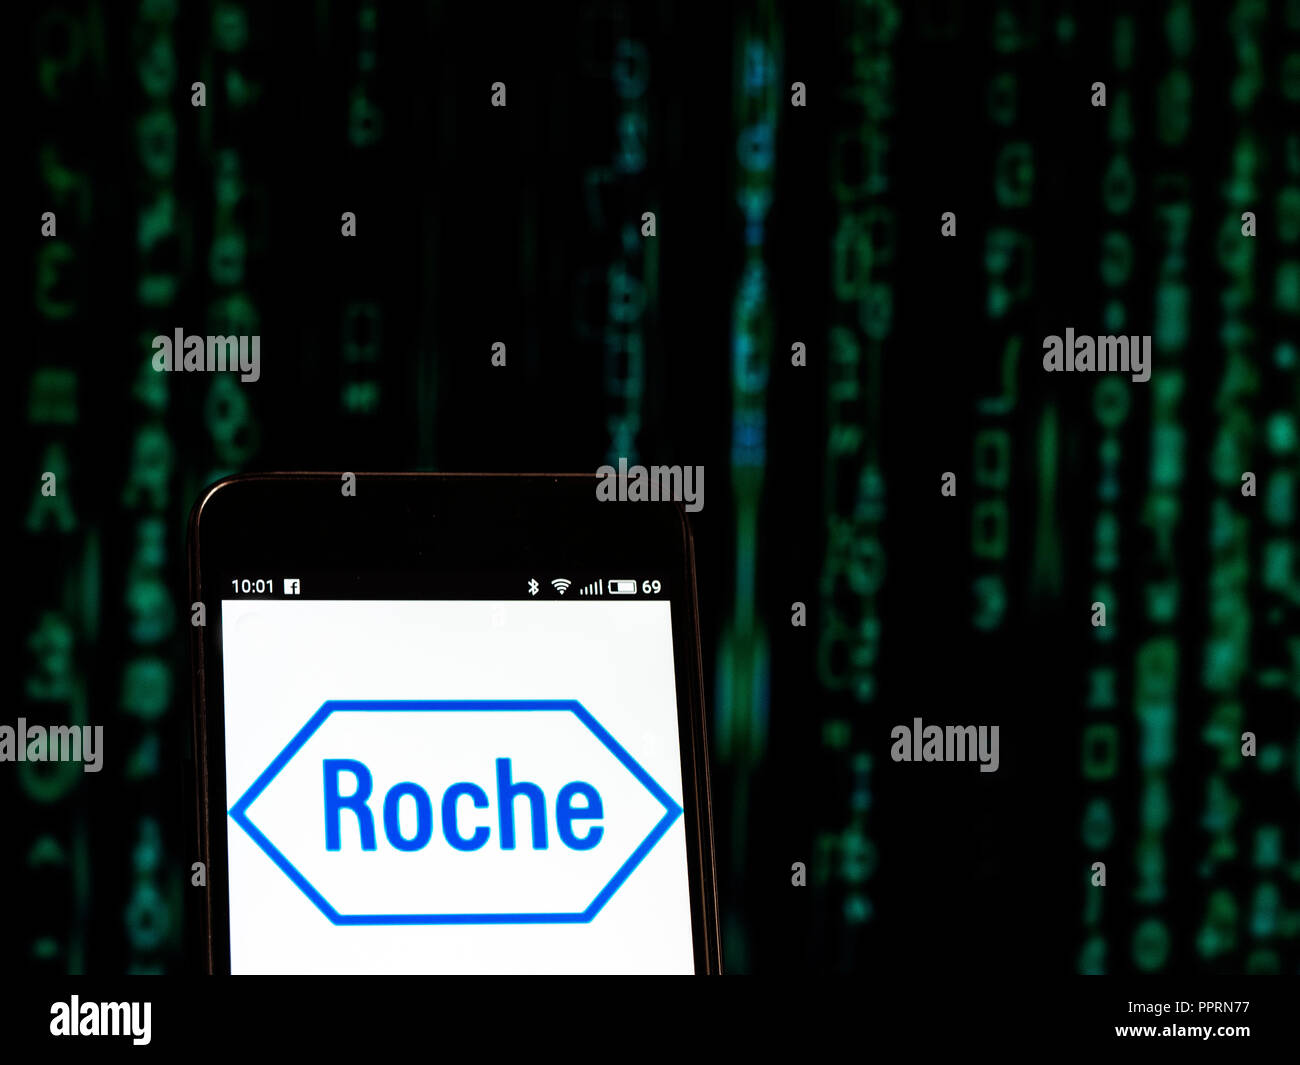 Hoffmann-La Roche logo seen displayed on smart phone. F. Hoffmann-La Roche AG is a Swiss multinational healthcare company  that operates worldwide under two divisions: Pharmaceuticals and Diagnostics. Stock Photo